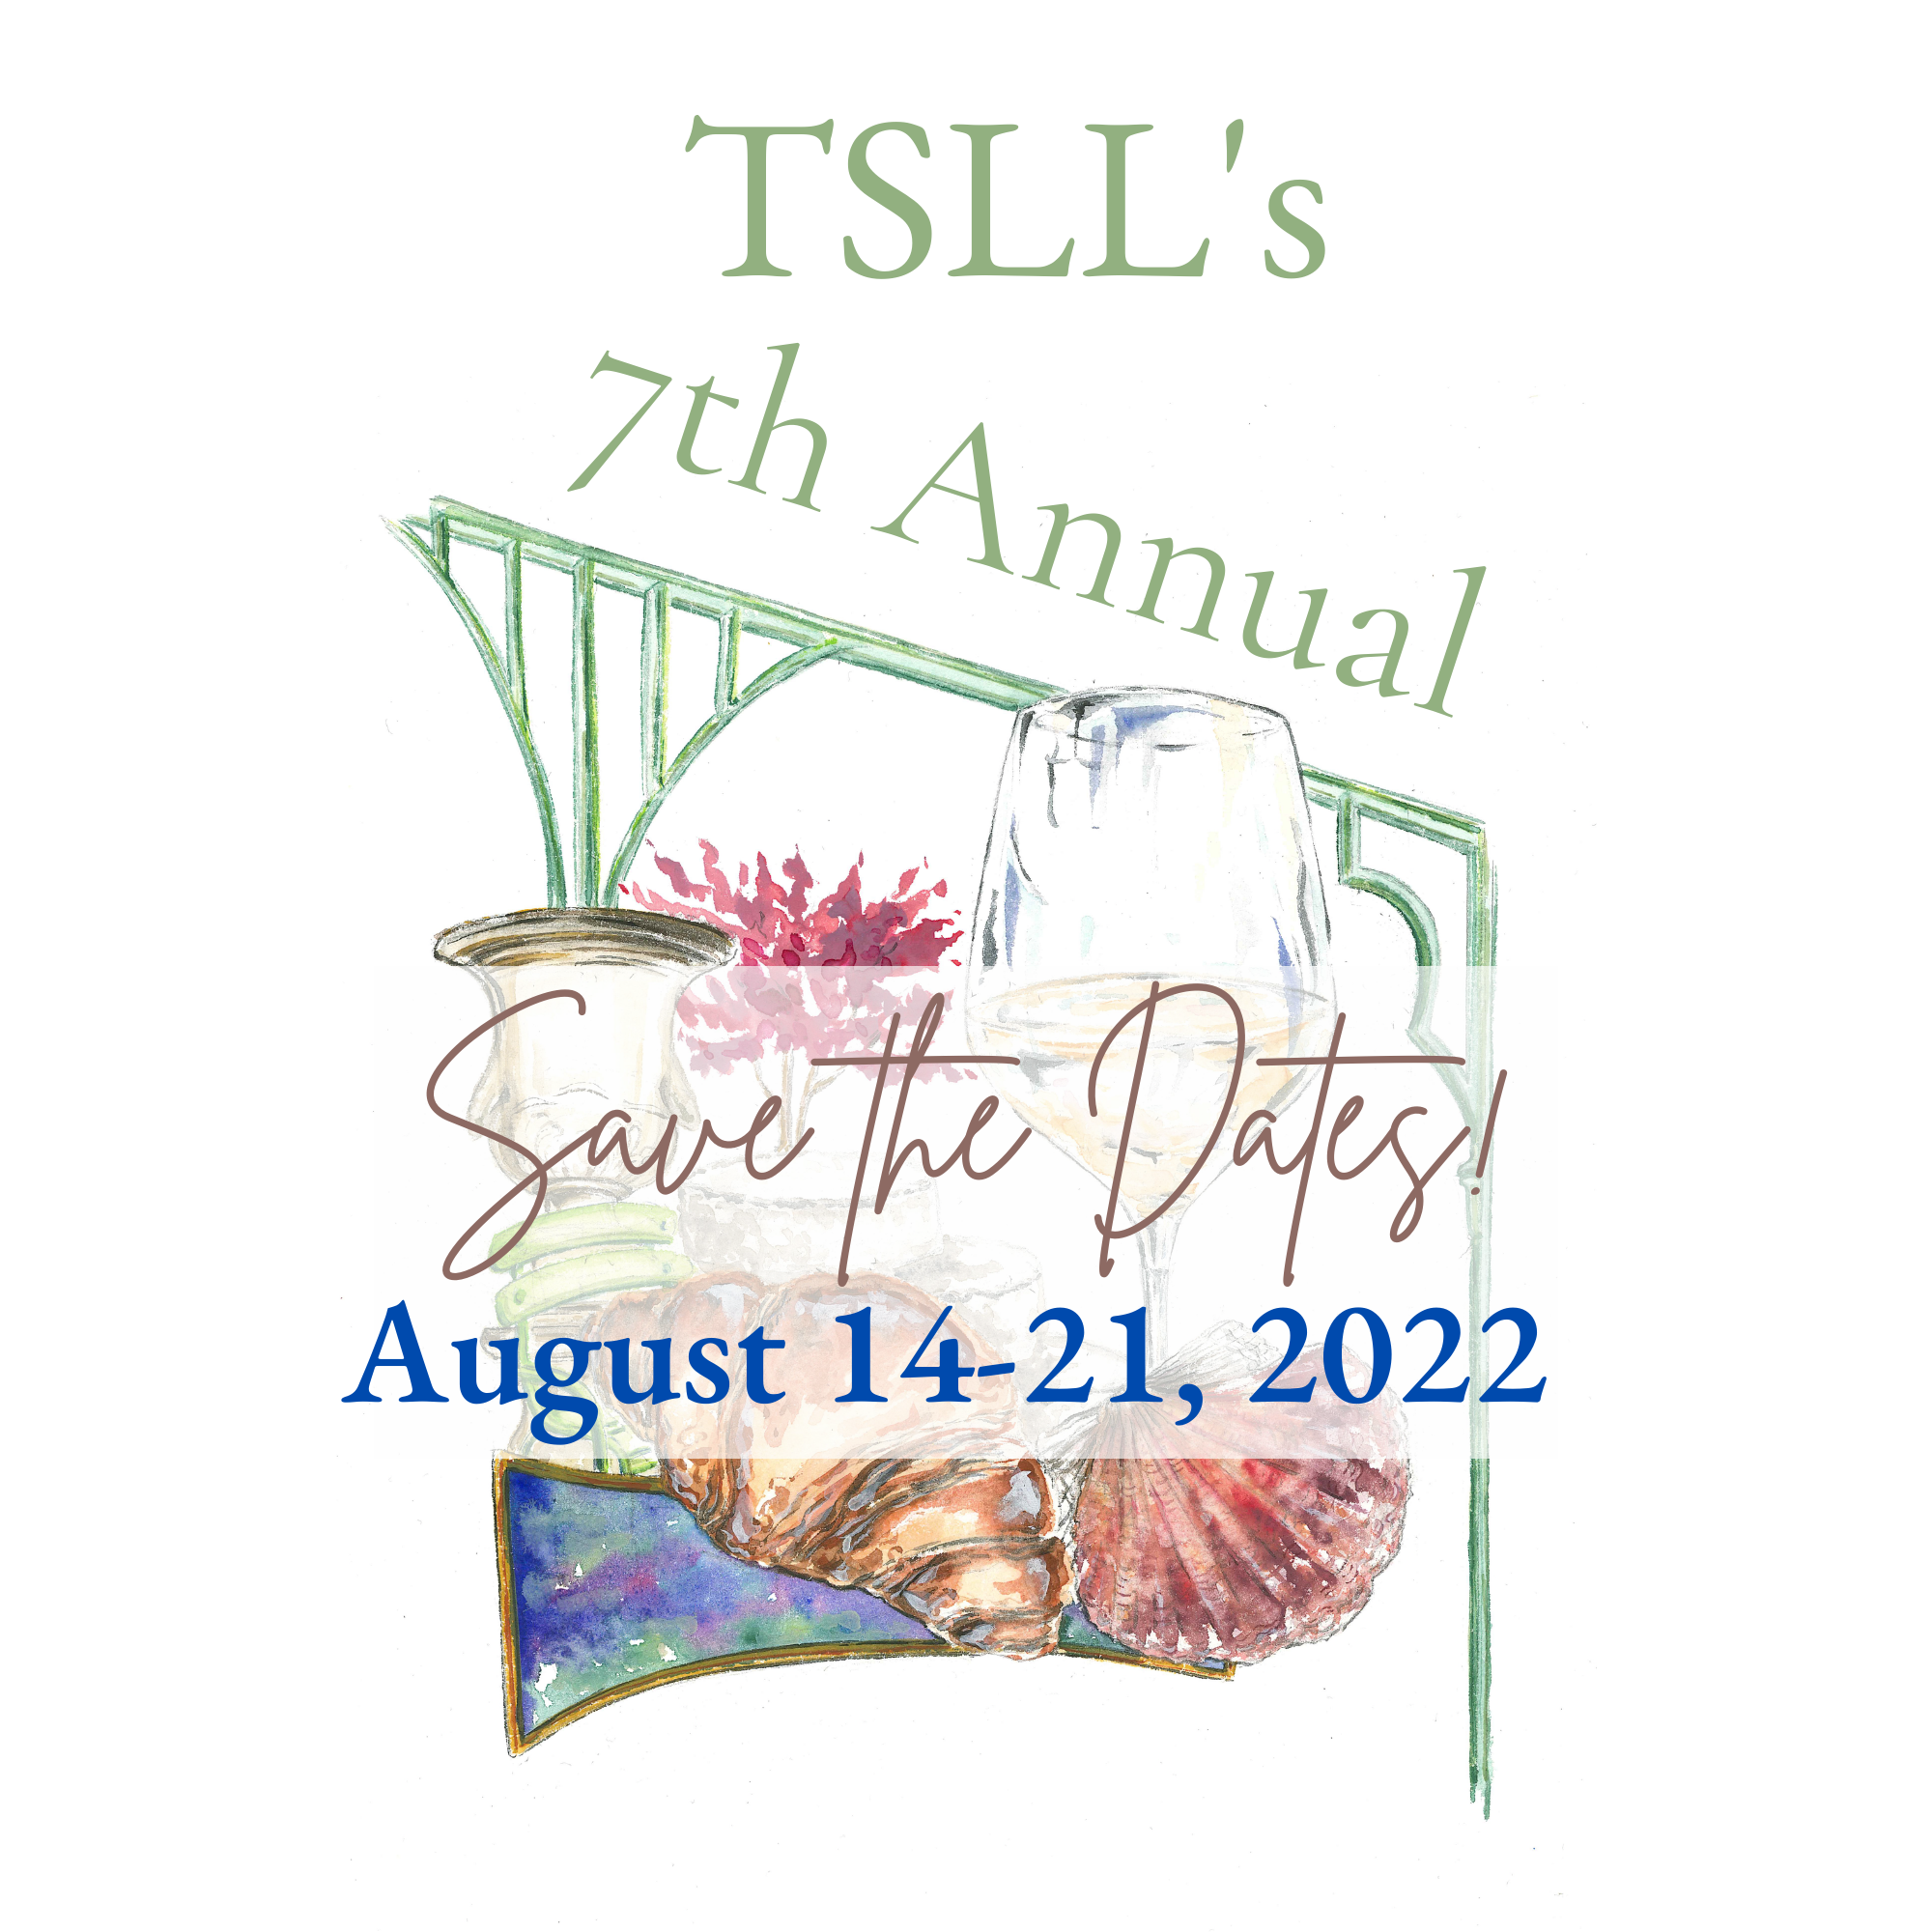 TSLL’s 7th Annual French Week is Coming!